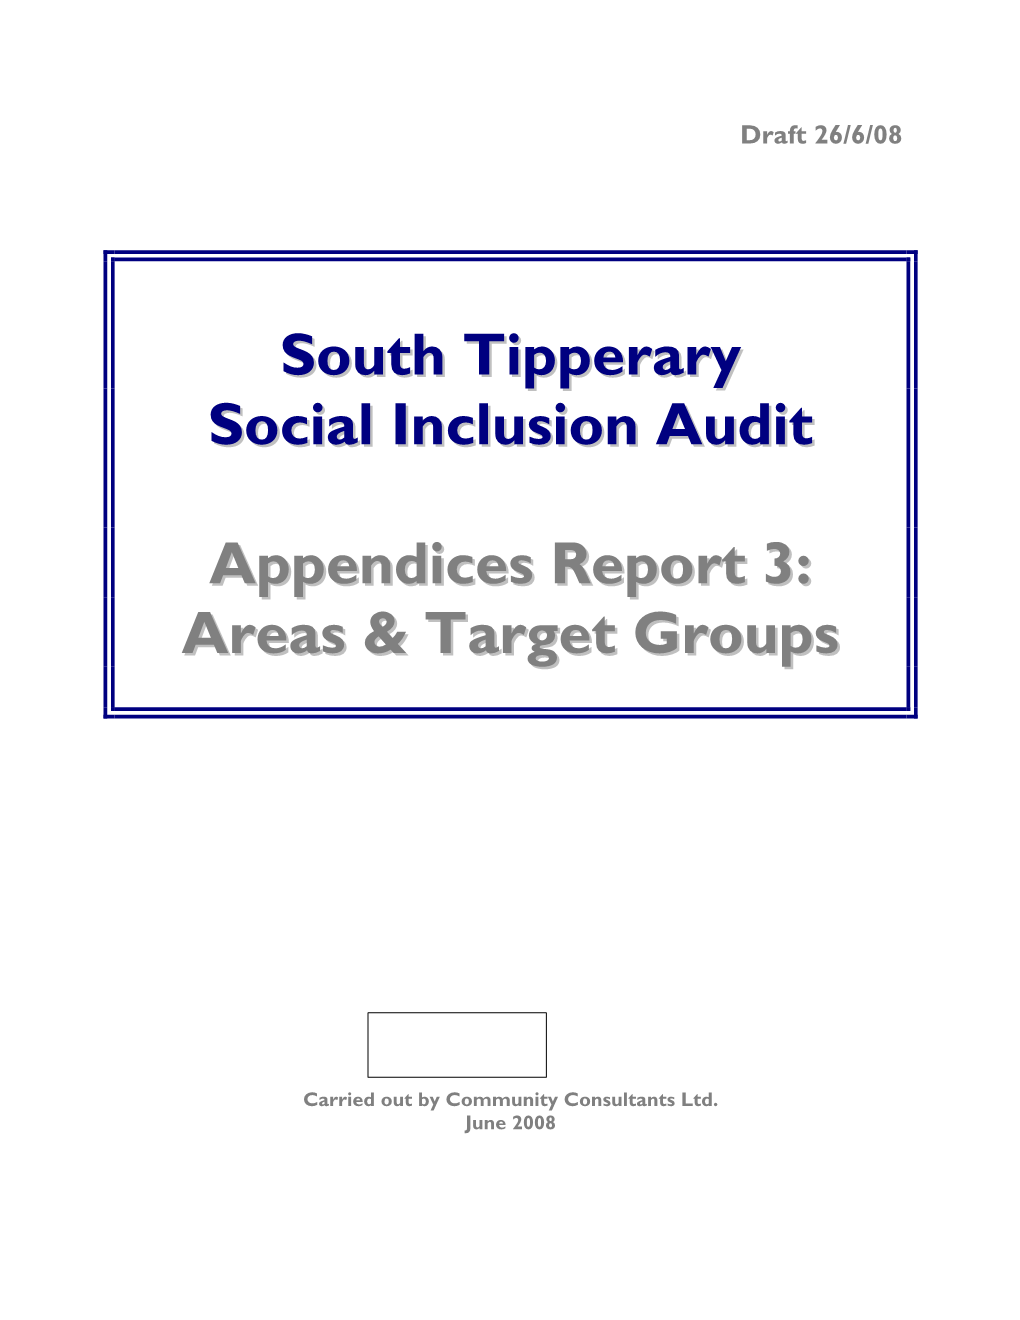 South Tipperary Social Inclusion Audit Appendices Report 3: Areas